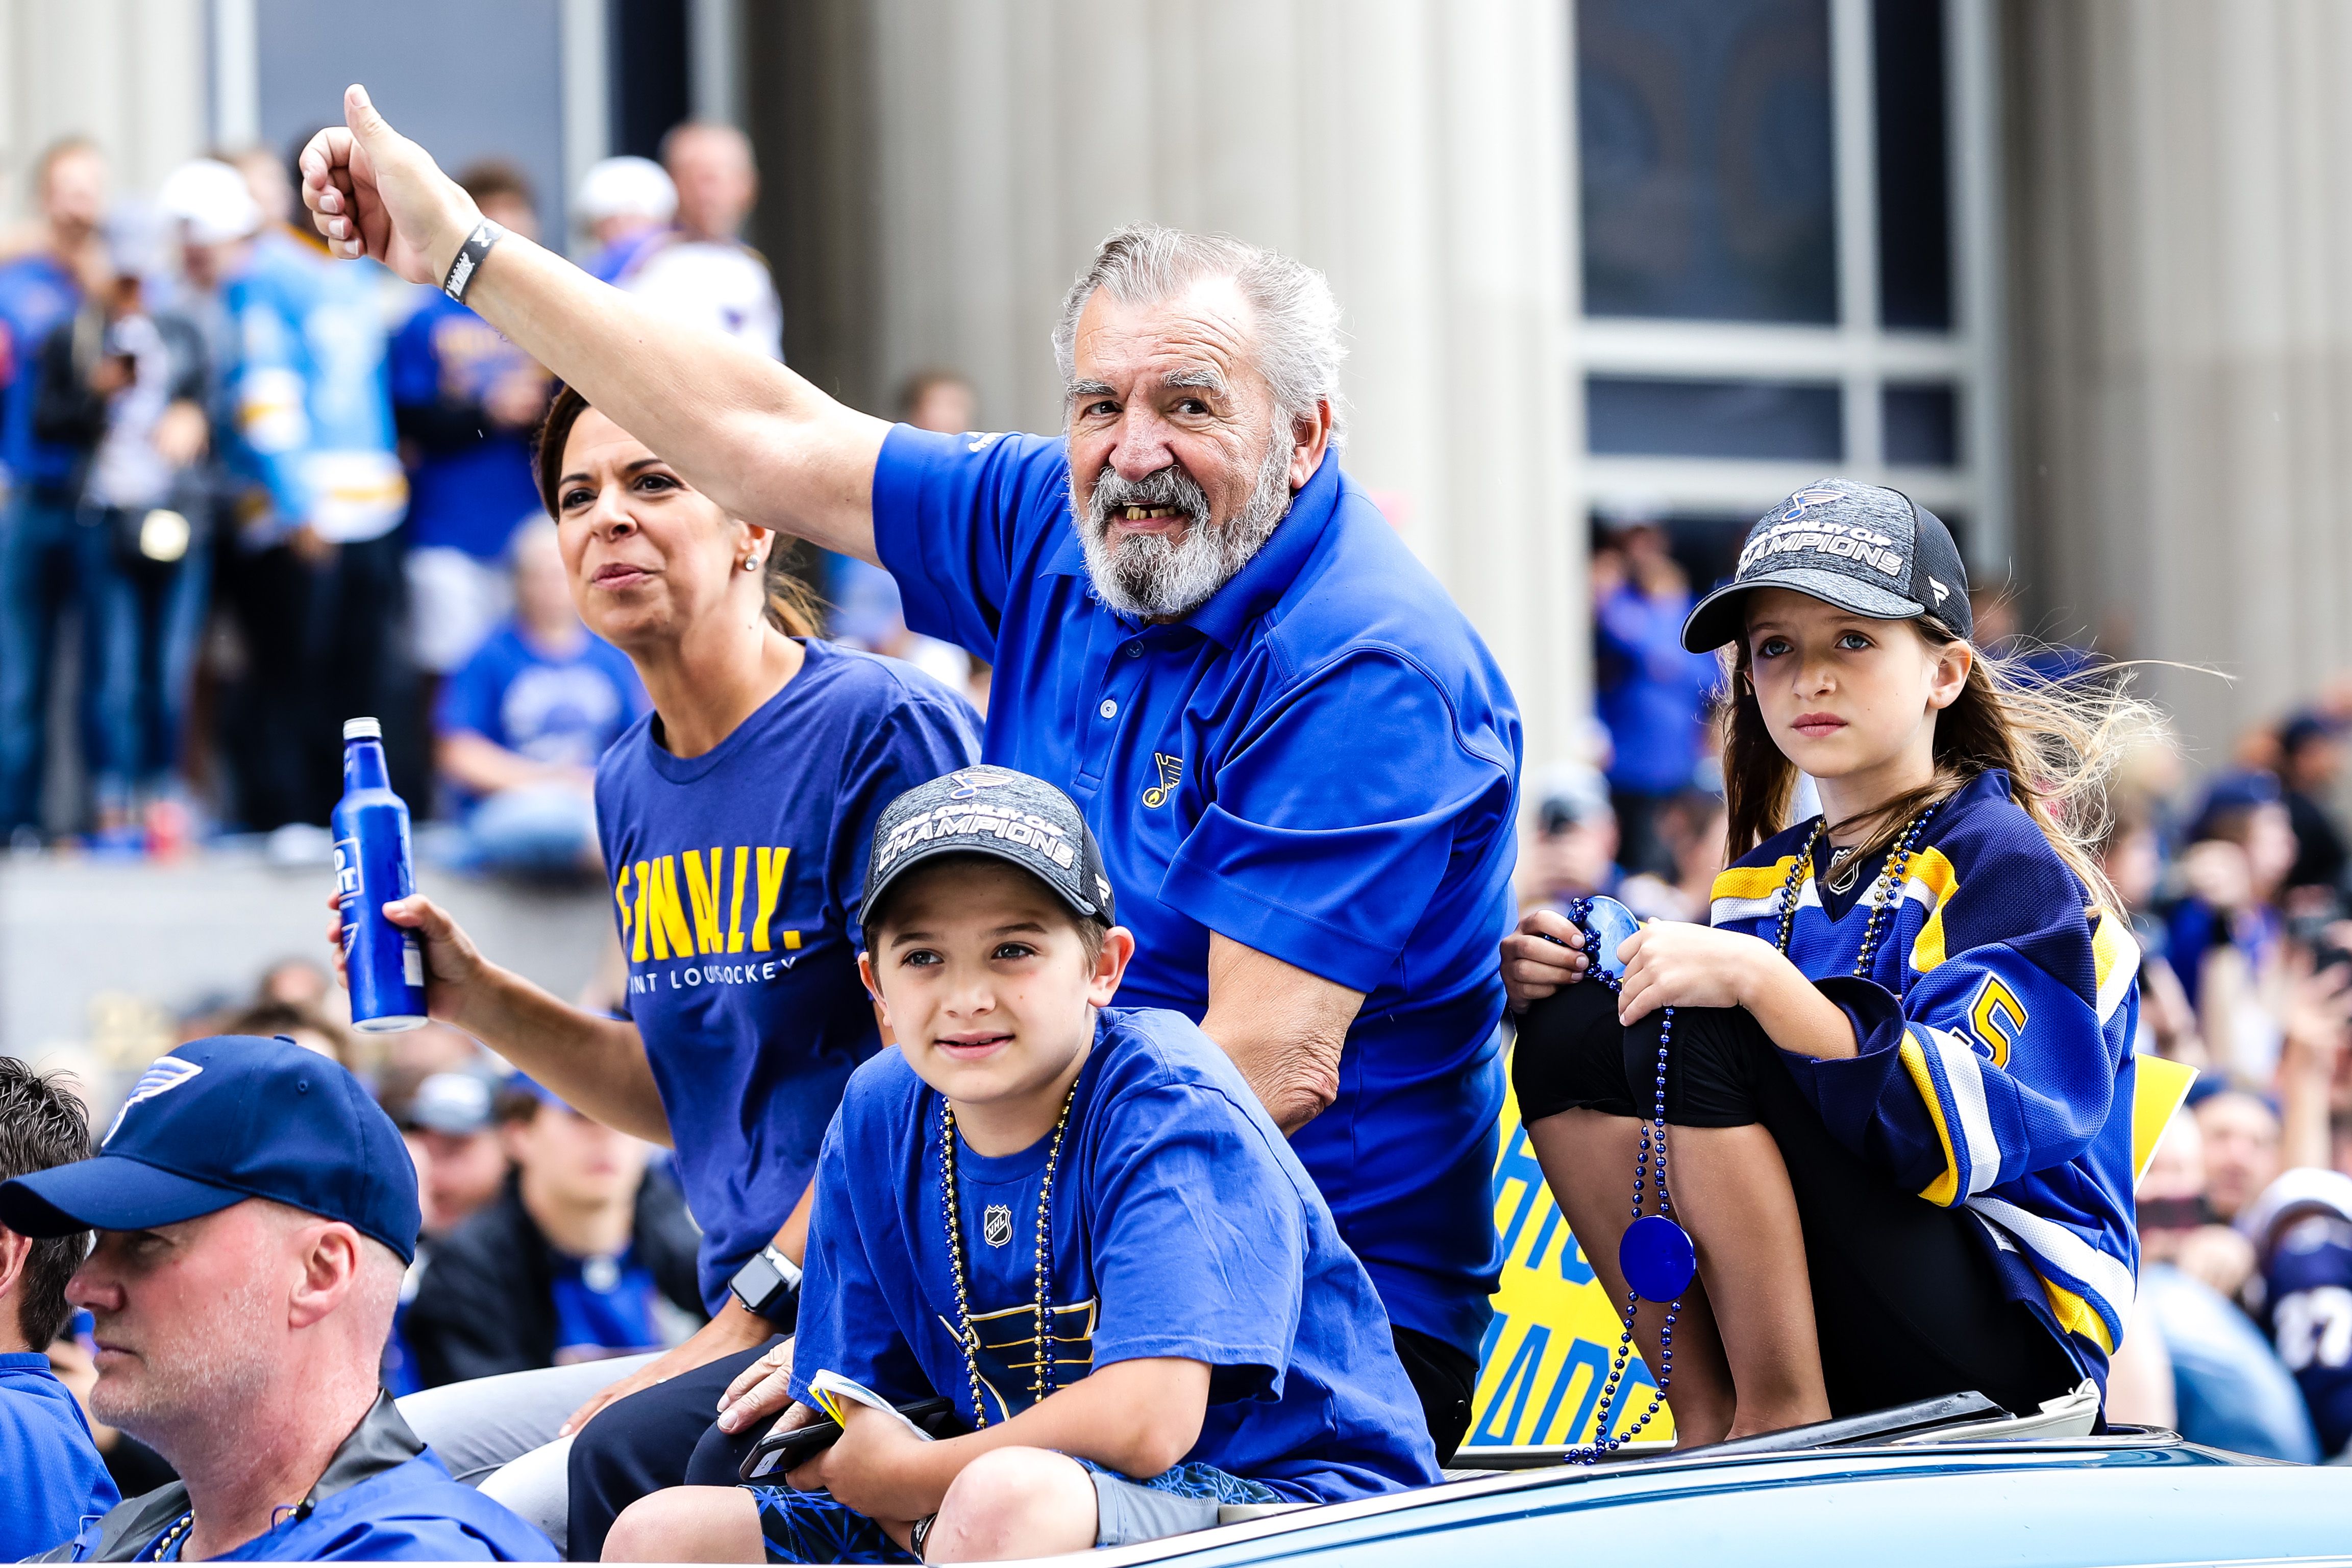 Bobby Plager cheering during the St. Louis Blues Victory Parade on June 15, 2019 | Getty Images